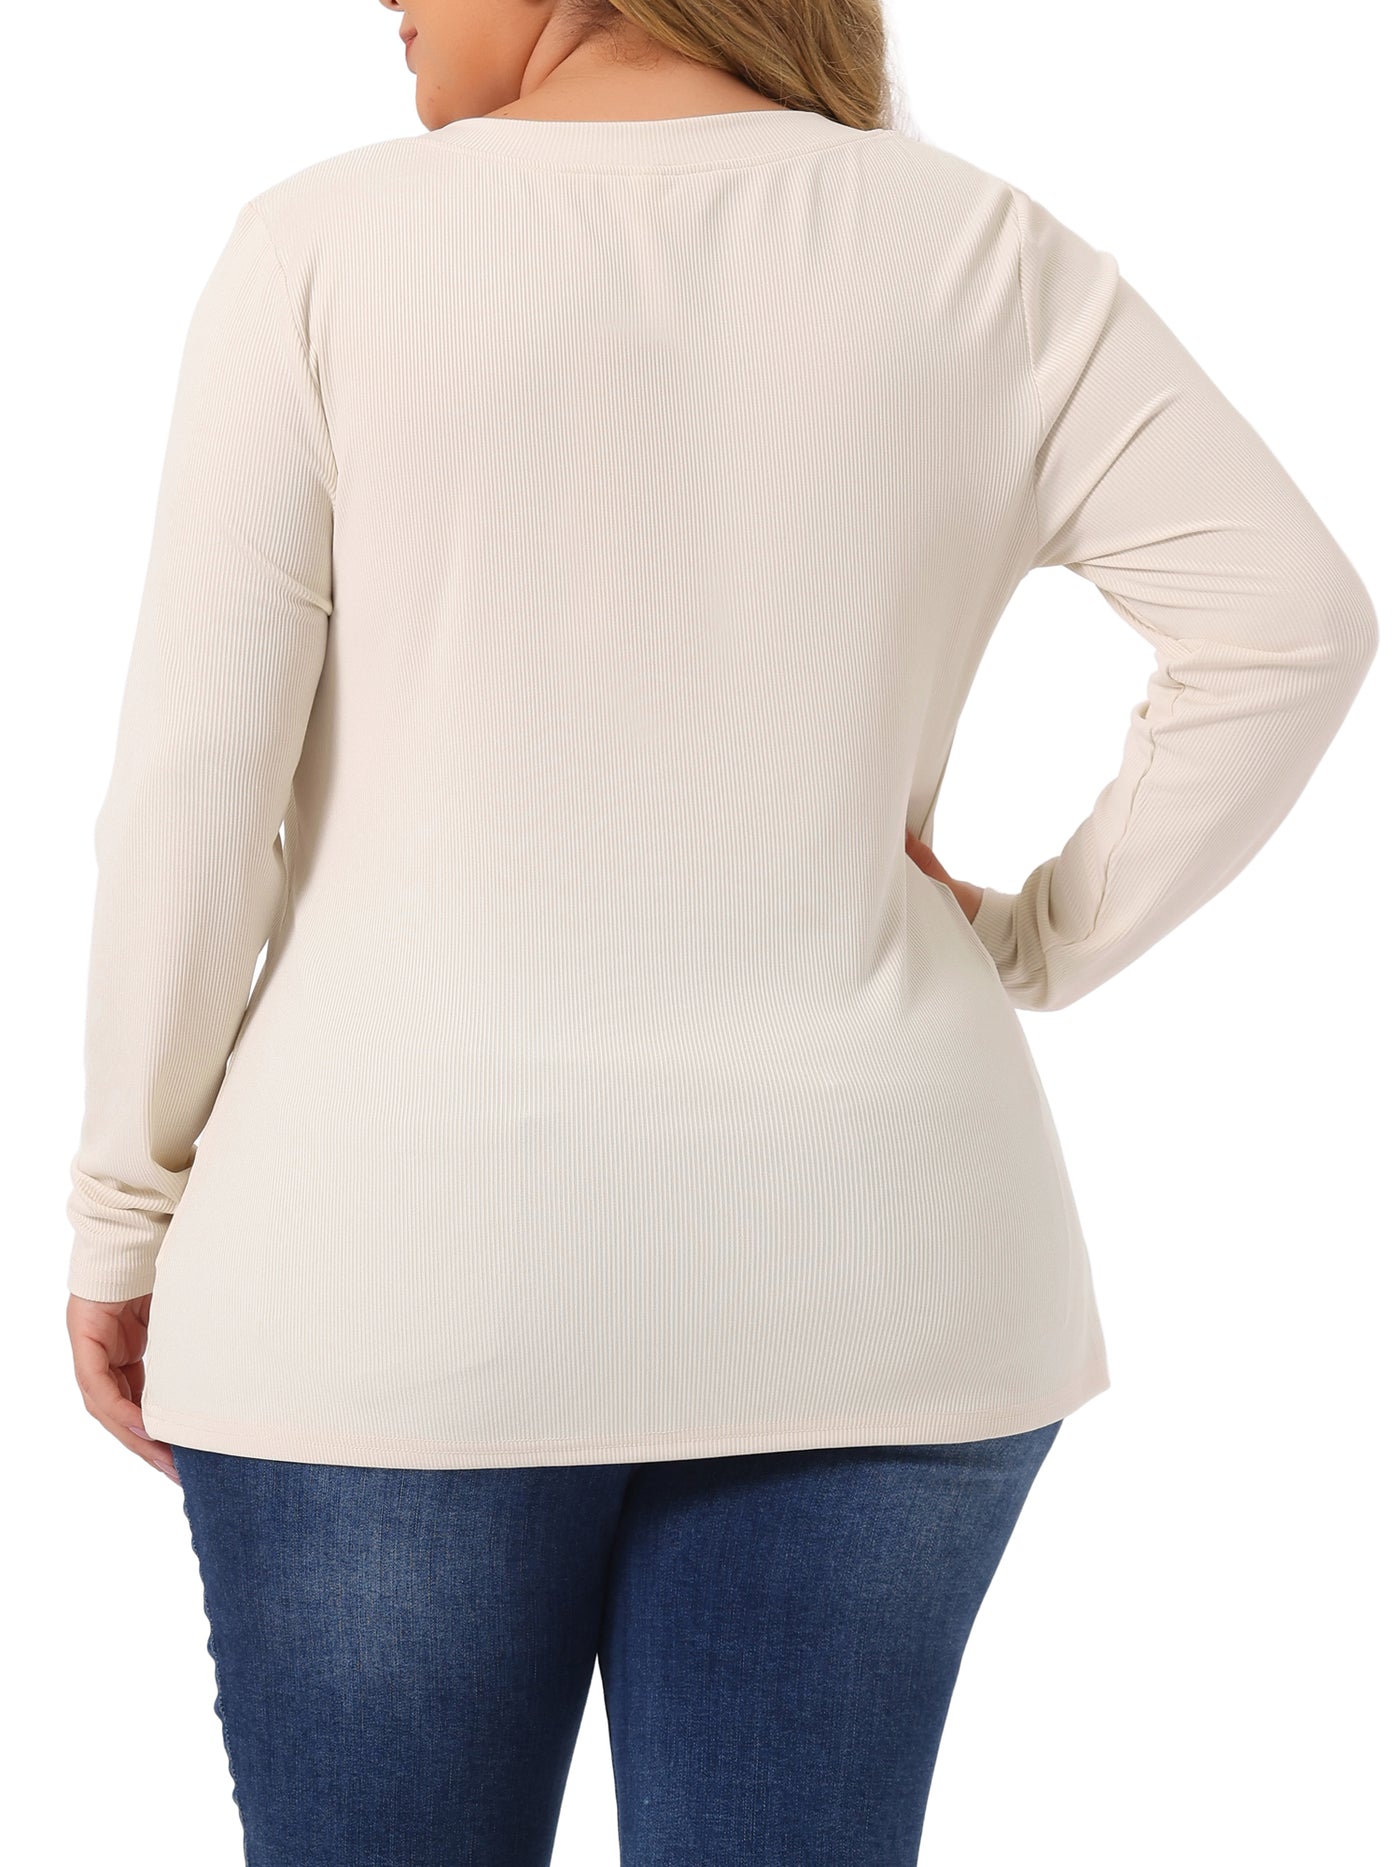 Bublédon Plus Size Knit Tops for Women Long Sleeve Cable Button Half Placket Pullover Shirt